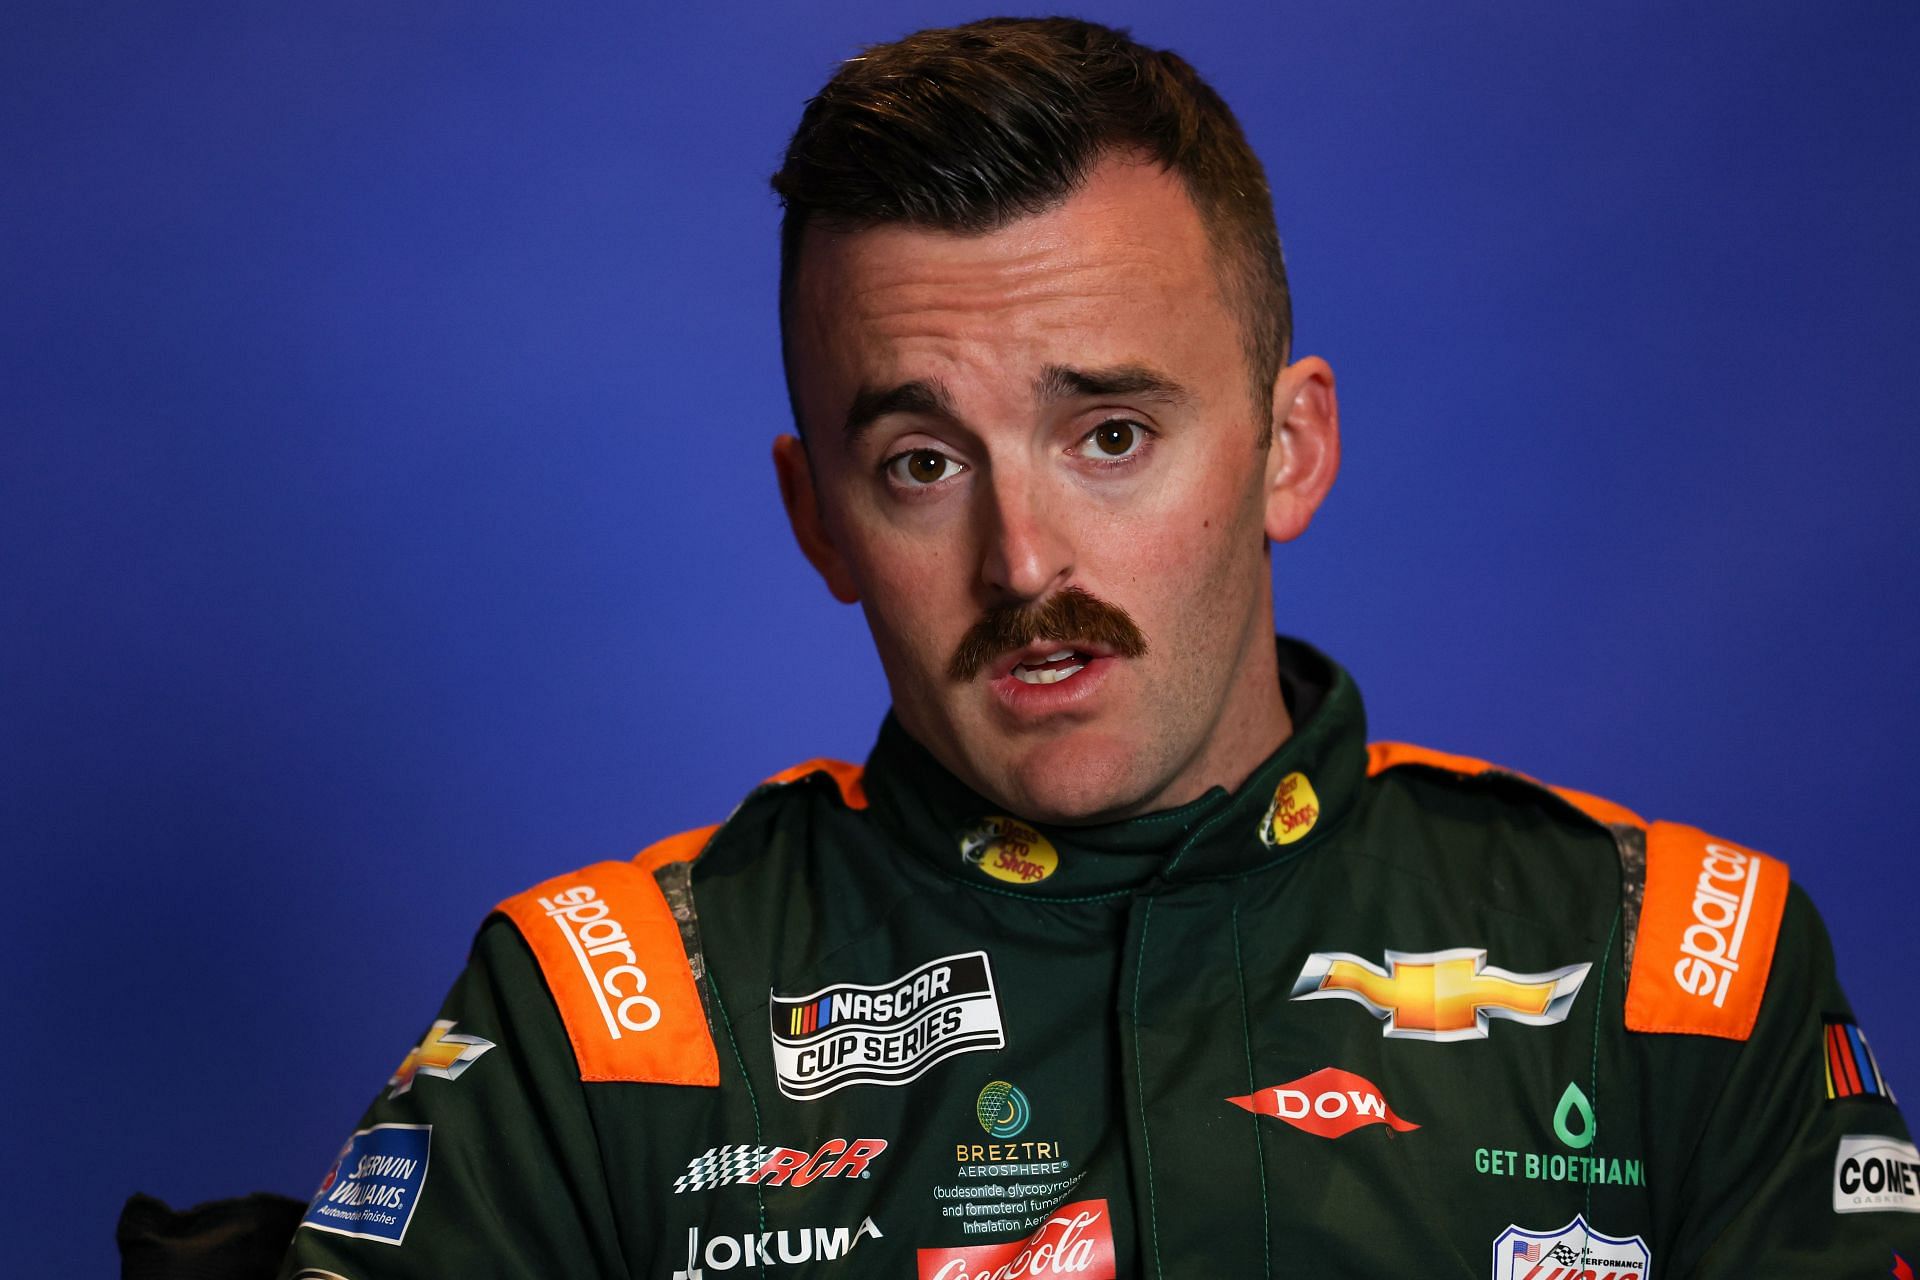 Austin Dillon needs to quit NASCAR” RCR driver portrayed as villain by NASCAR fans for causing a huge wreck in the final stages of Daytona 500